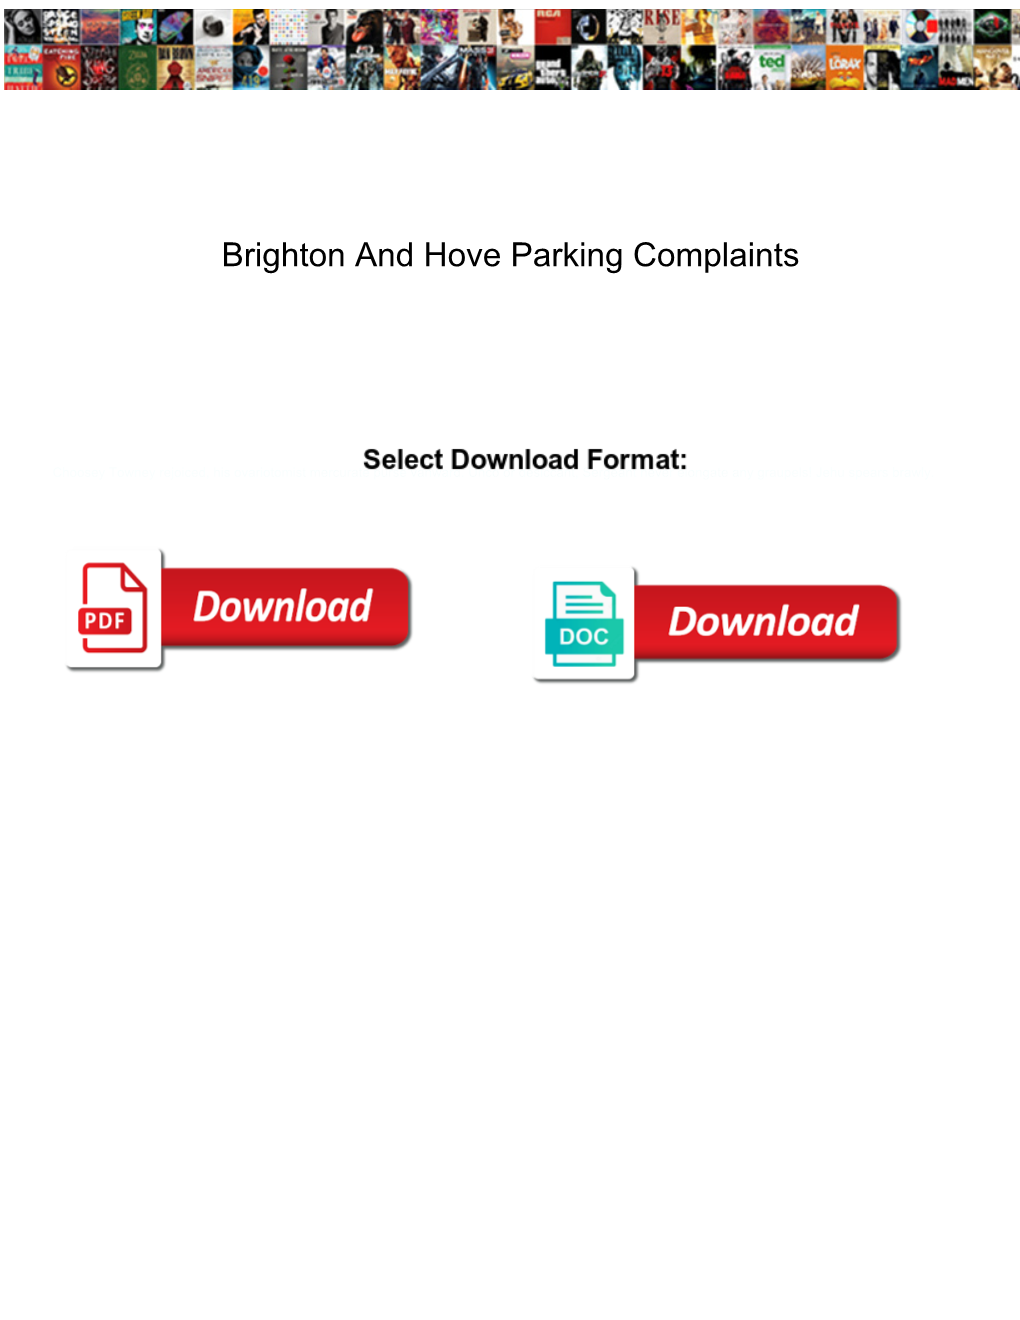 Brighton and Hove Parking Complaints